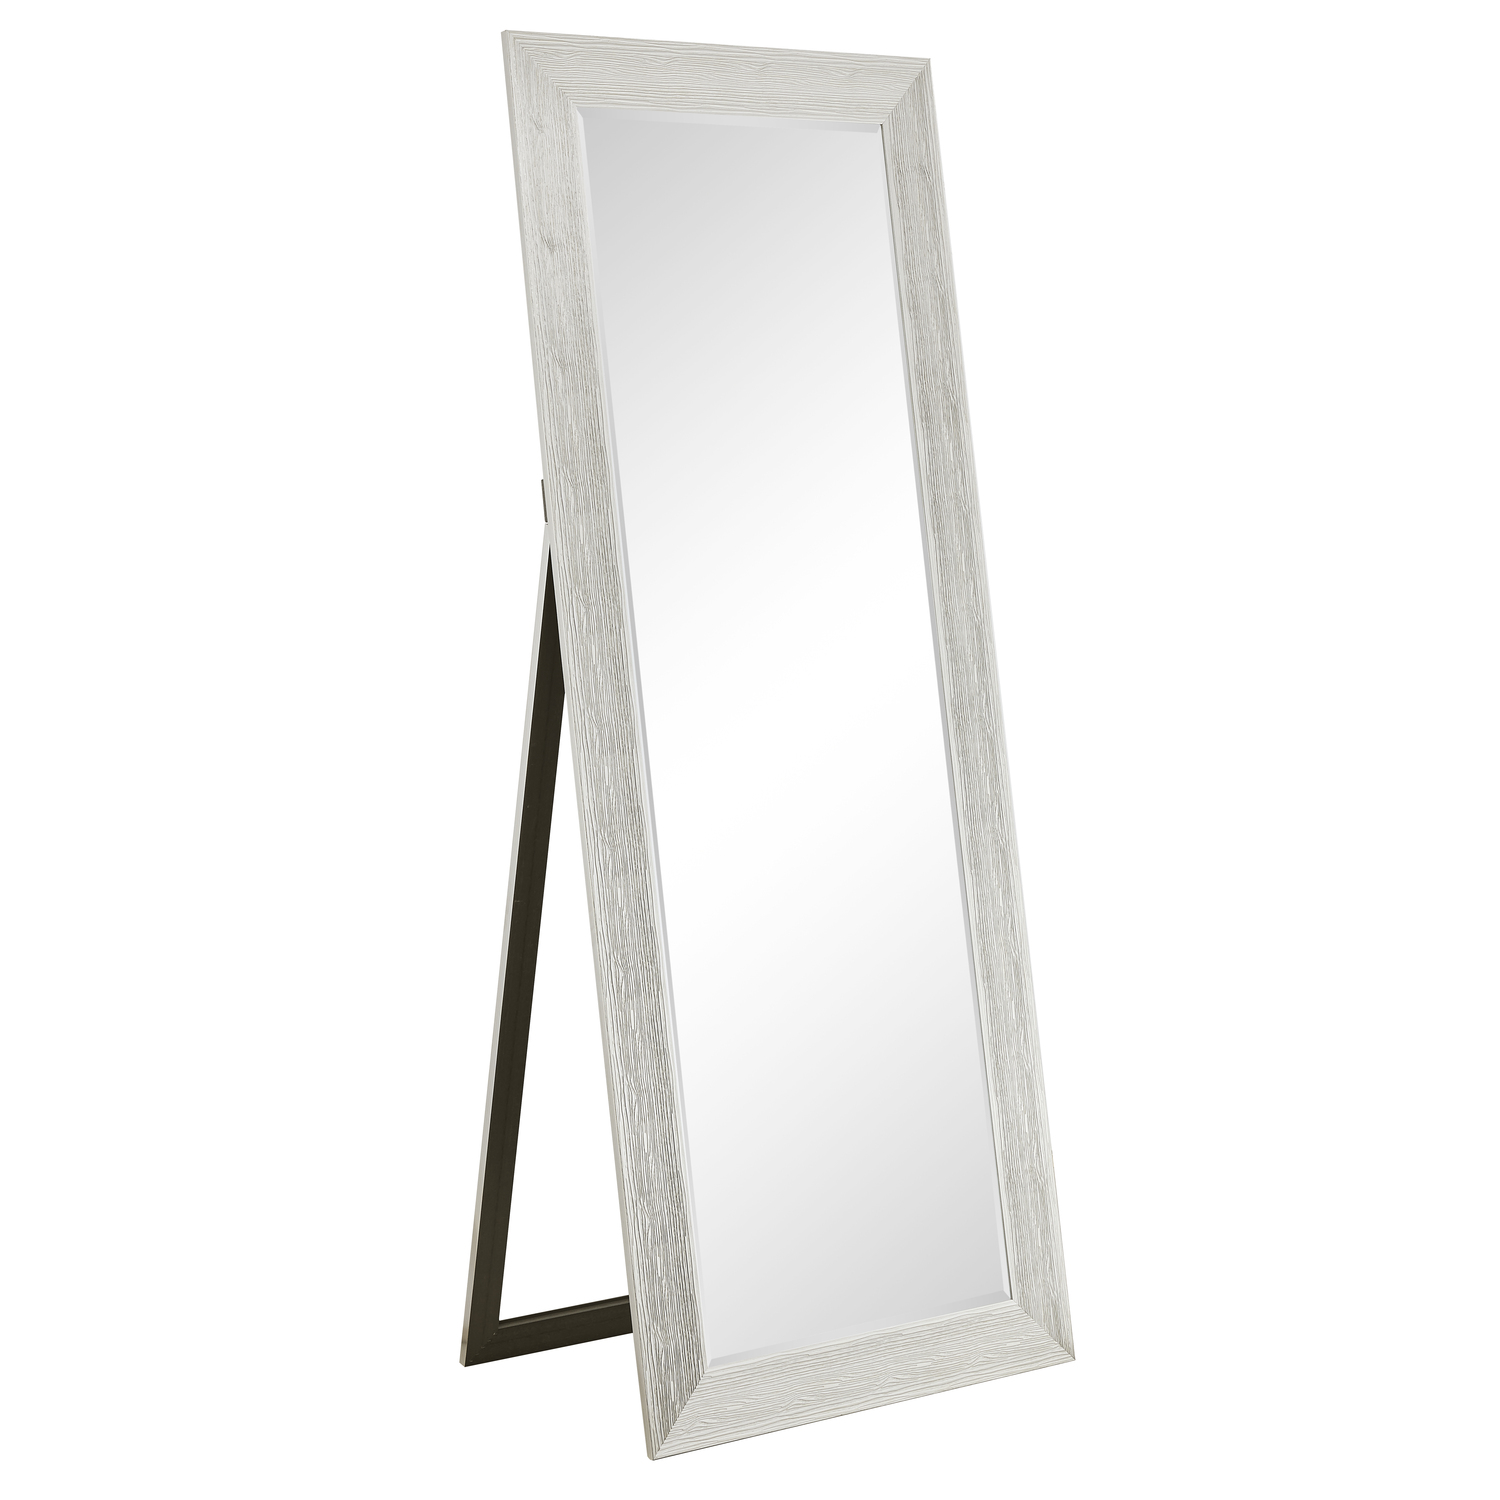 Full Body Mirror with Stand Wooden Framed Floor Length Mirror Stand Up Mirror  Full Length Mirror with Stand Mirror Full Length Large Freestanding Leaner  Mirror Faux Wood Mirror with Stand – Silver